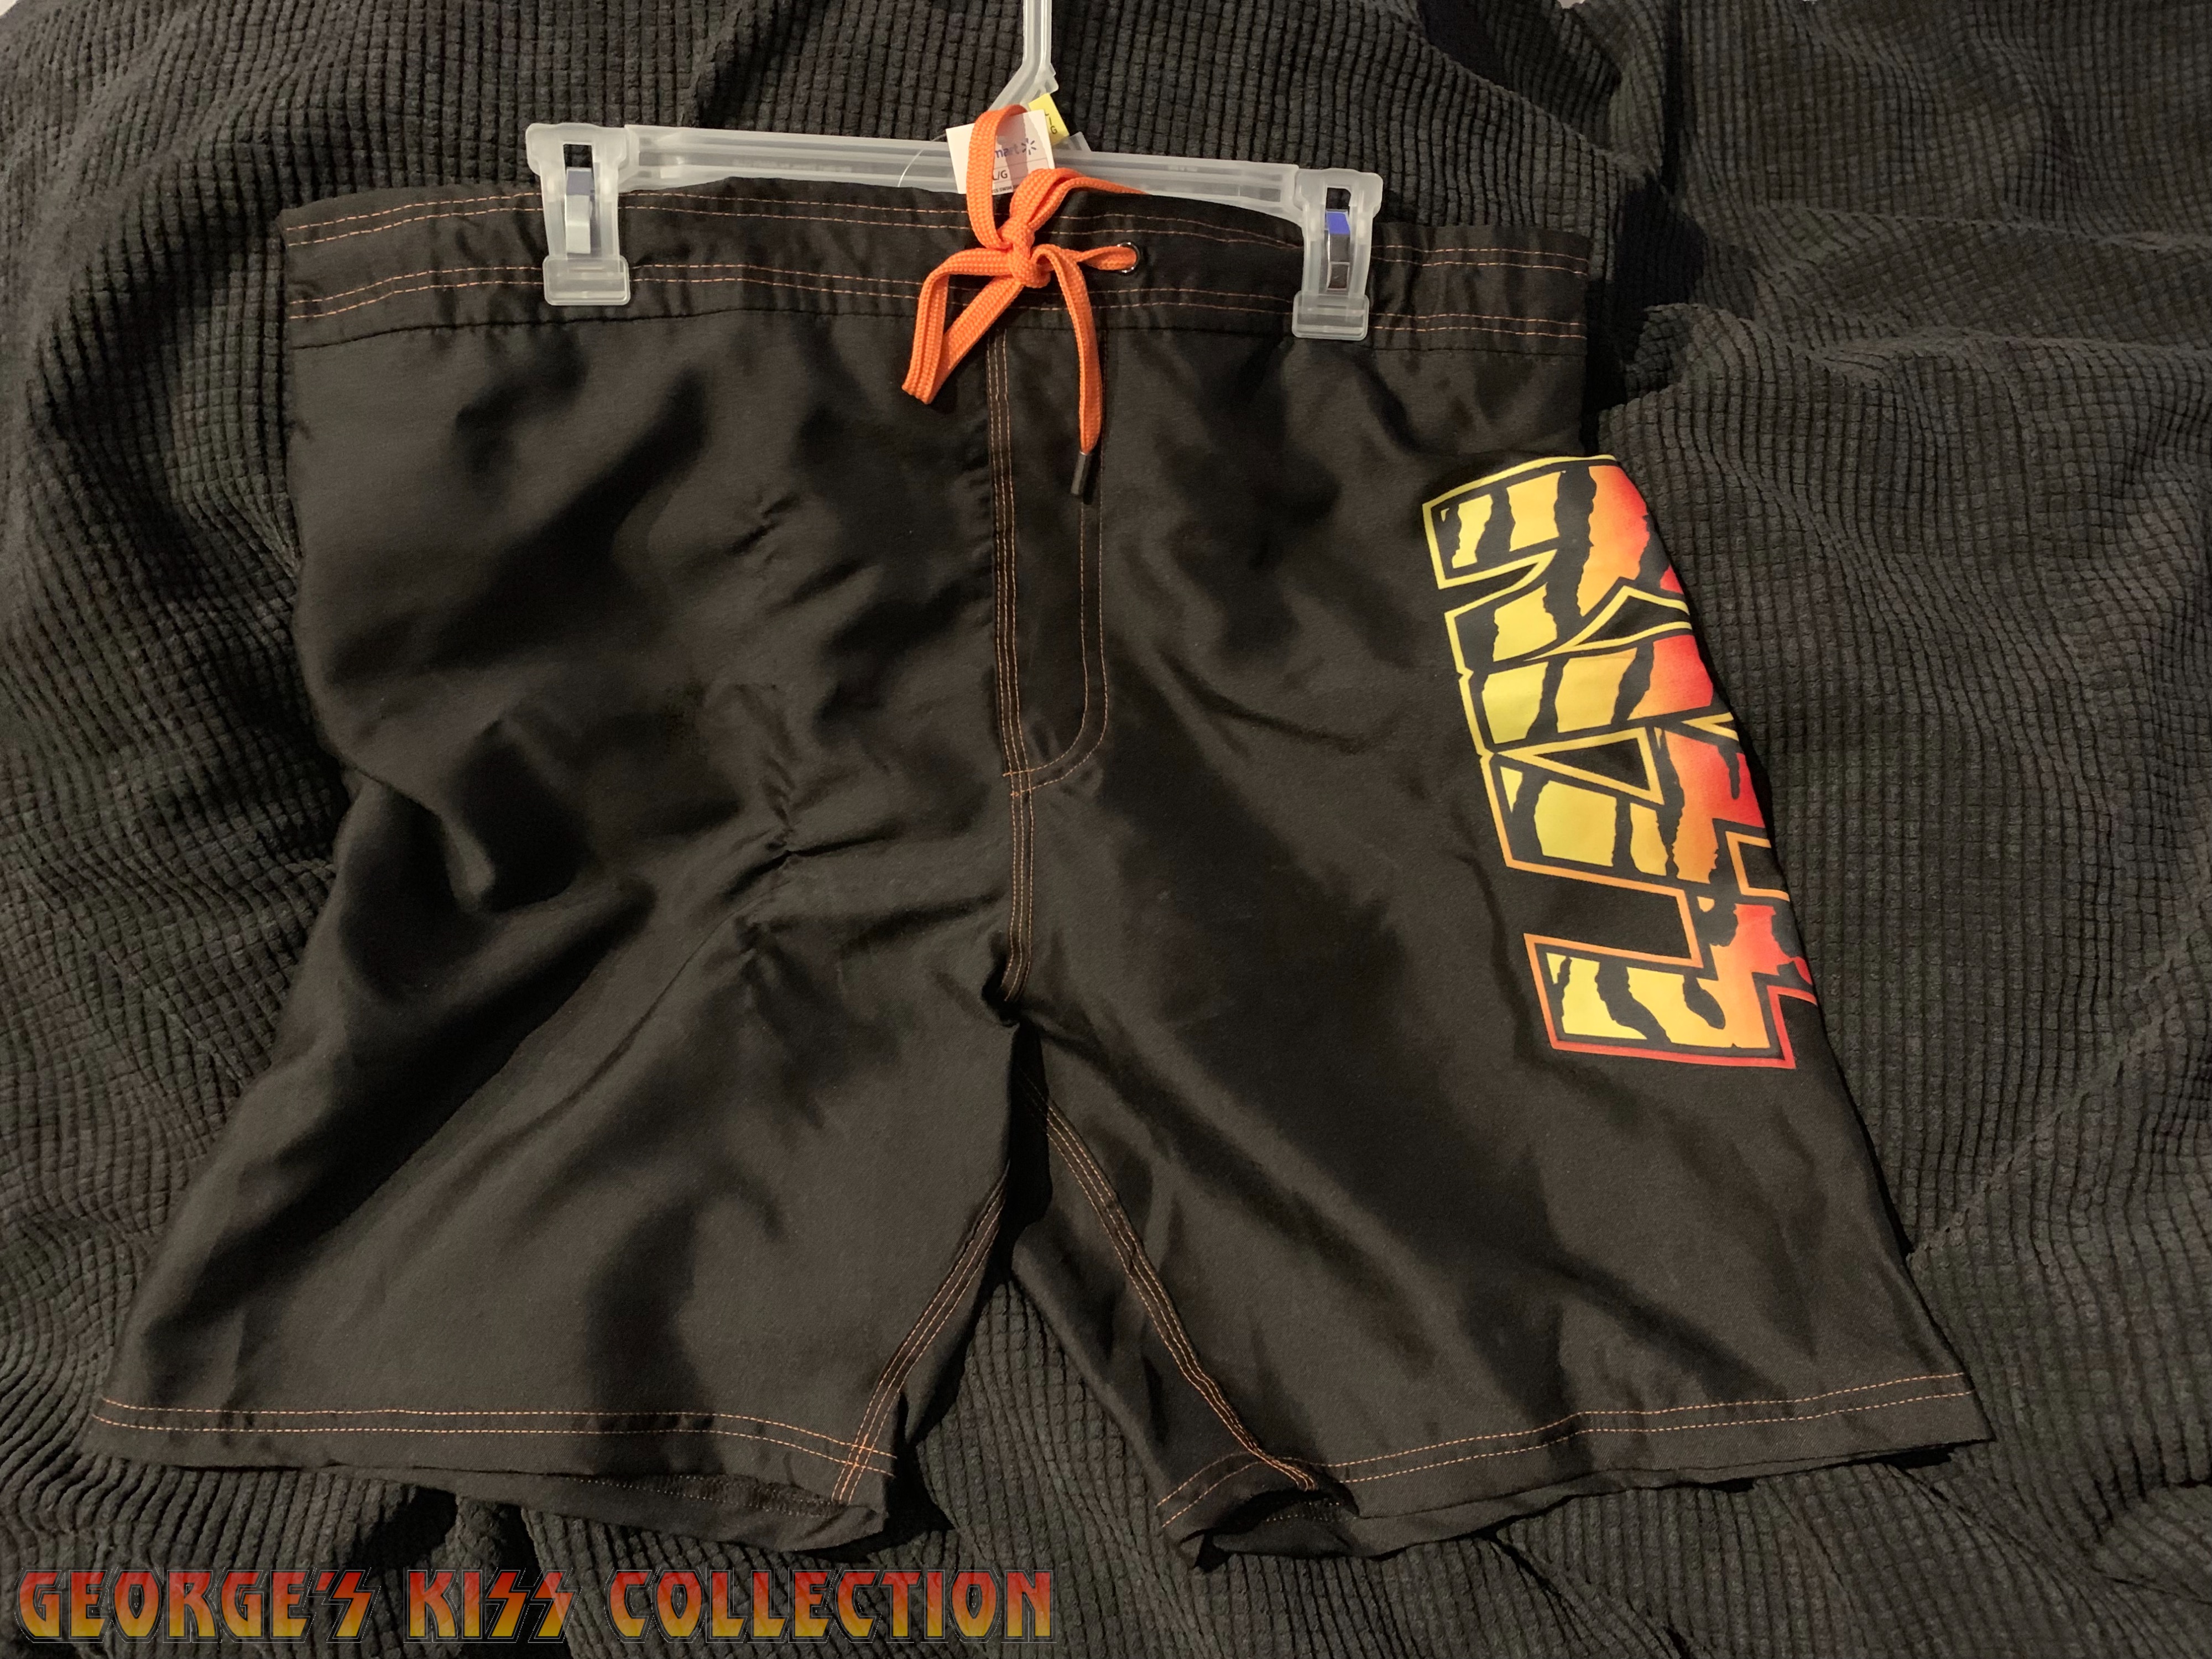 KISS Logo Swim Shorts In - George's KISS Collection